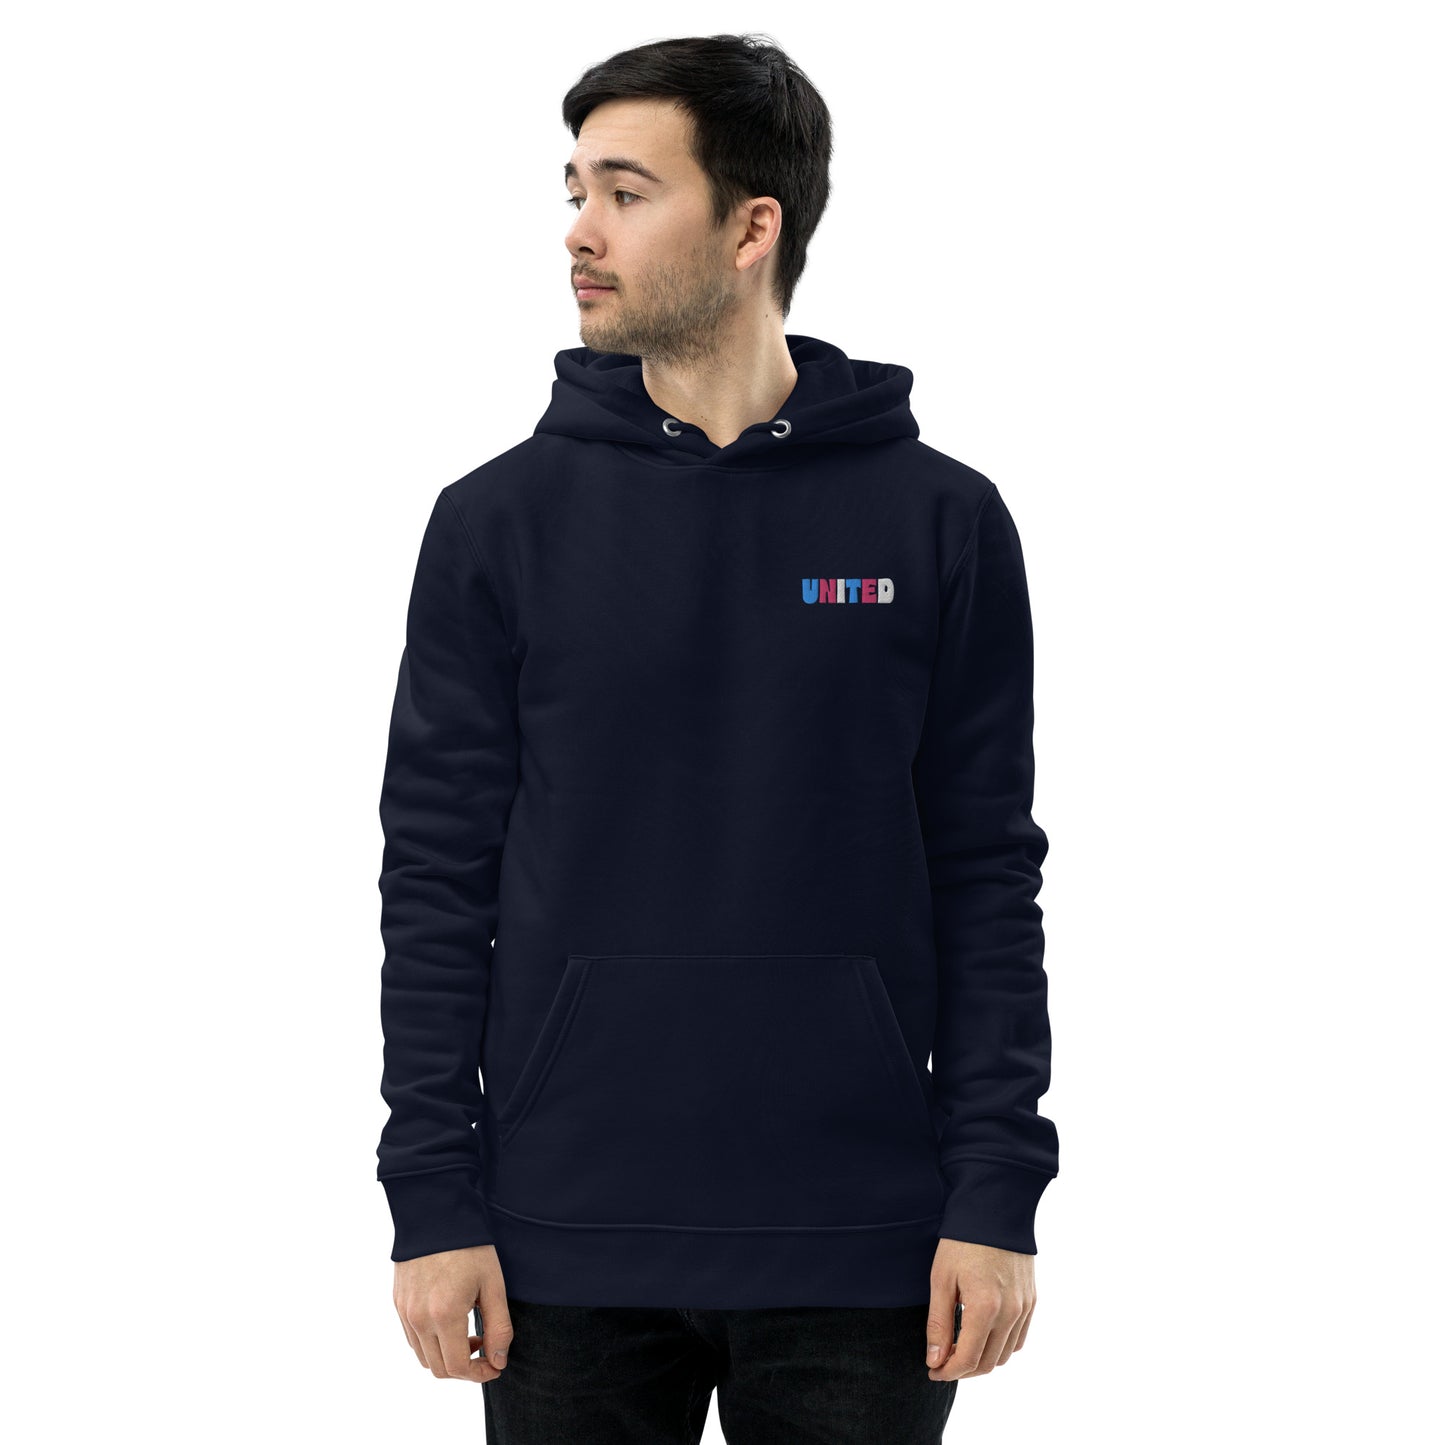 A male model wearing our unisex eco-friendly french navy hoodie featuring on the upper left chest; united embroidery in transgender pride colors, adding a touch of lgbtq to your outfit. sizes: small, medium, large, extra large, double extra large.